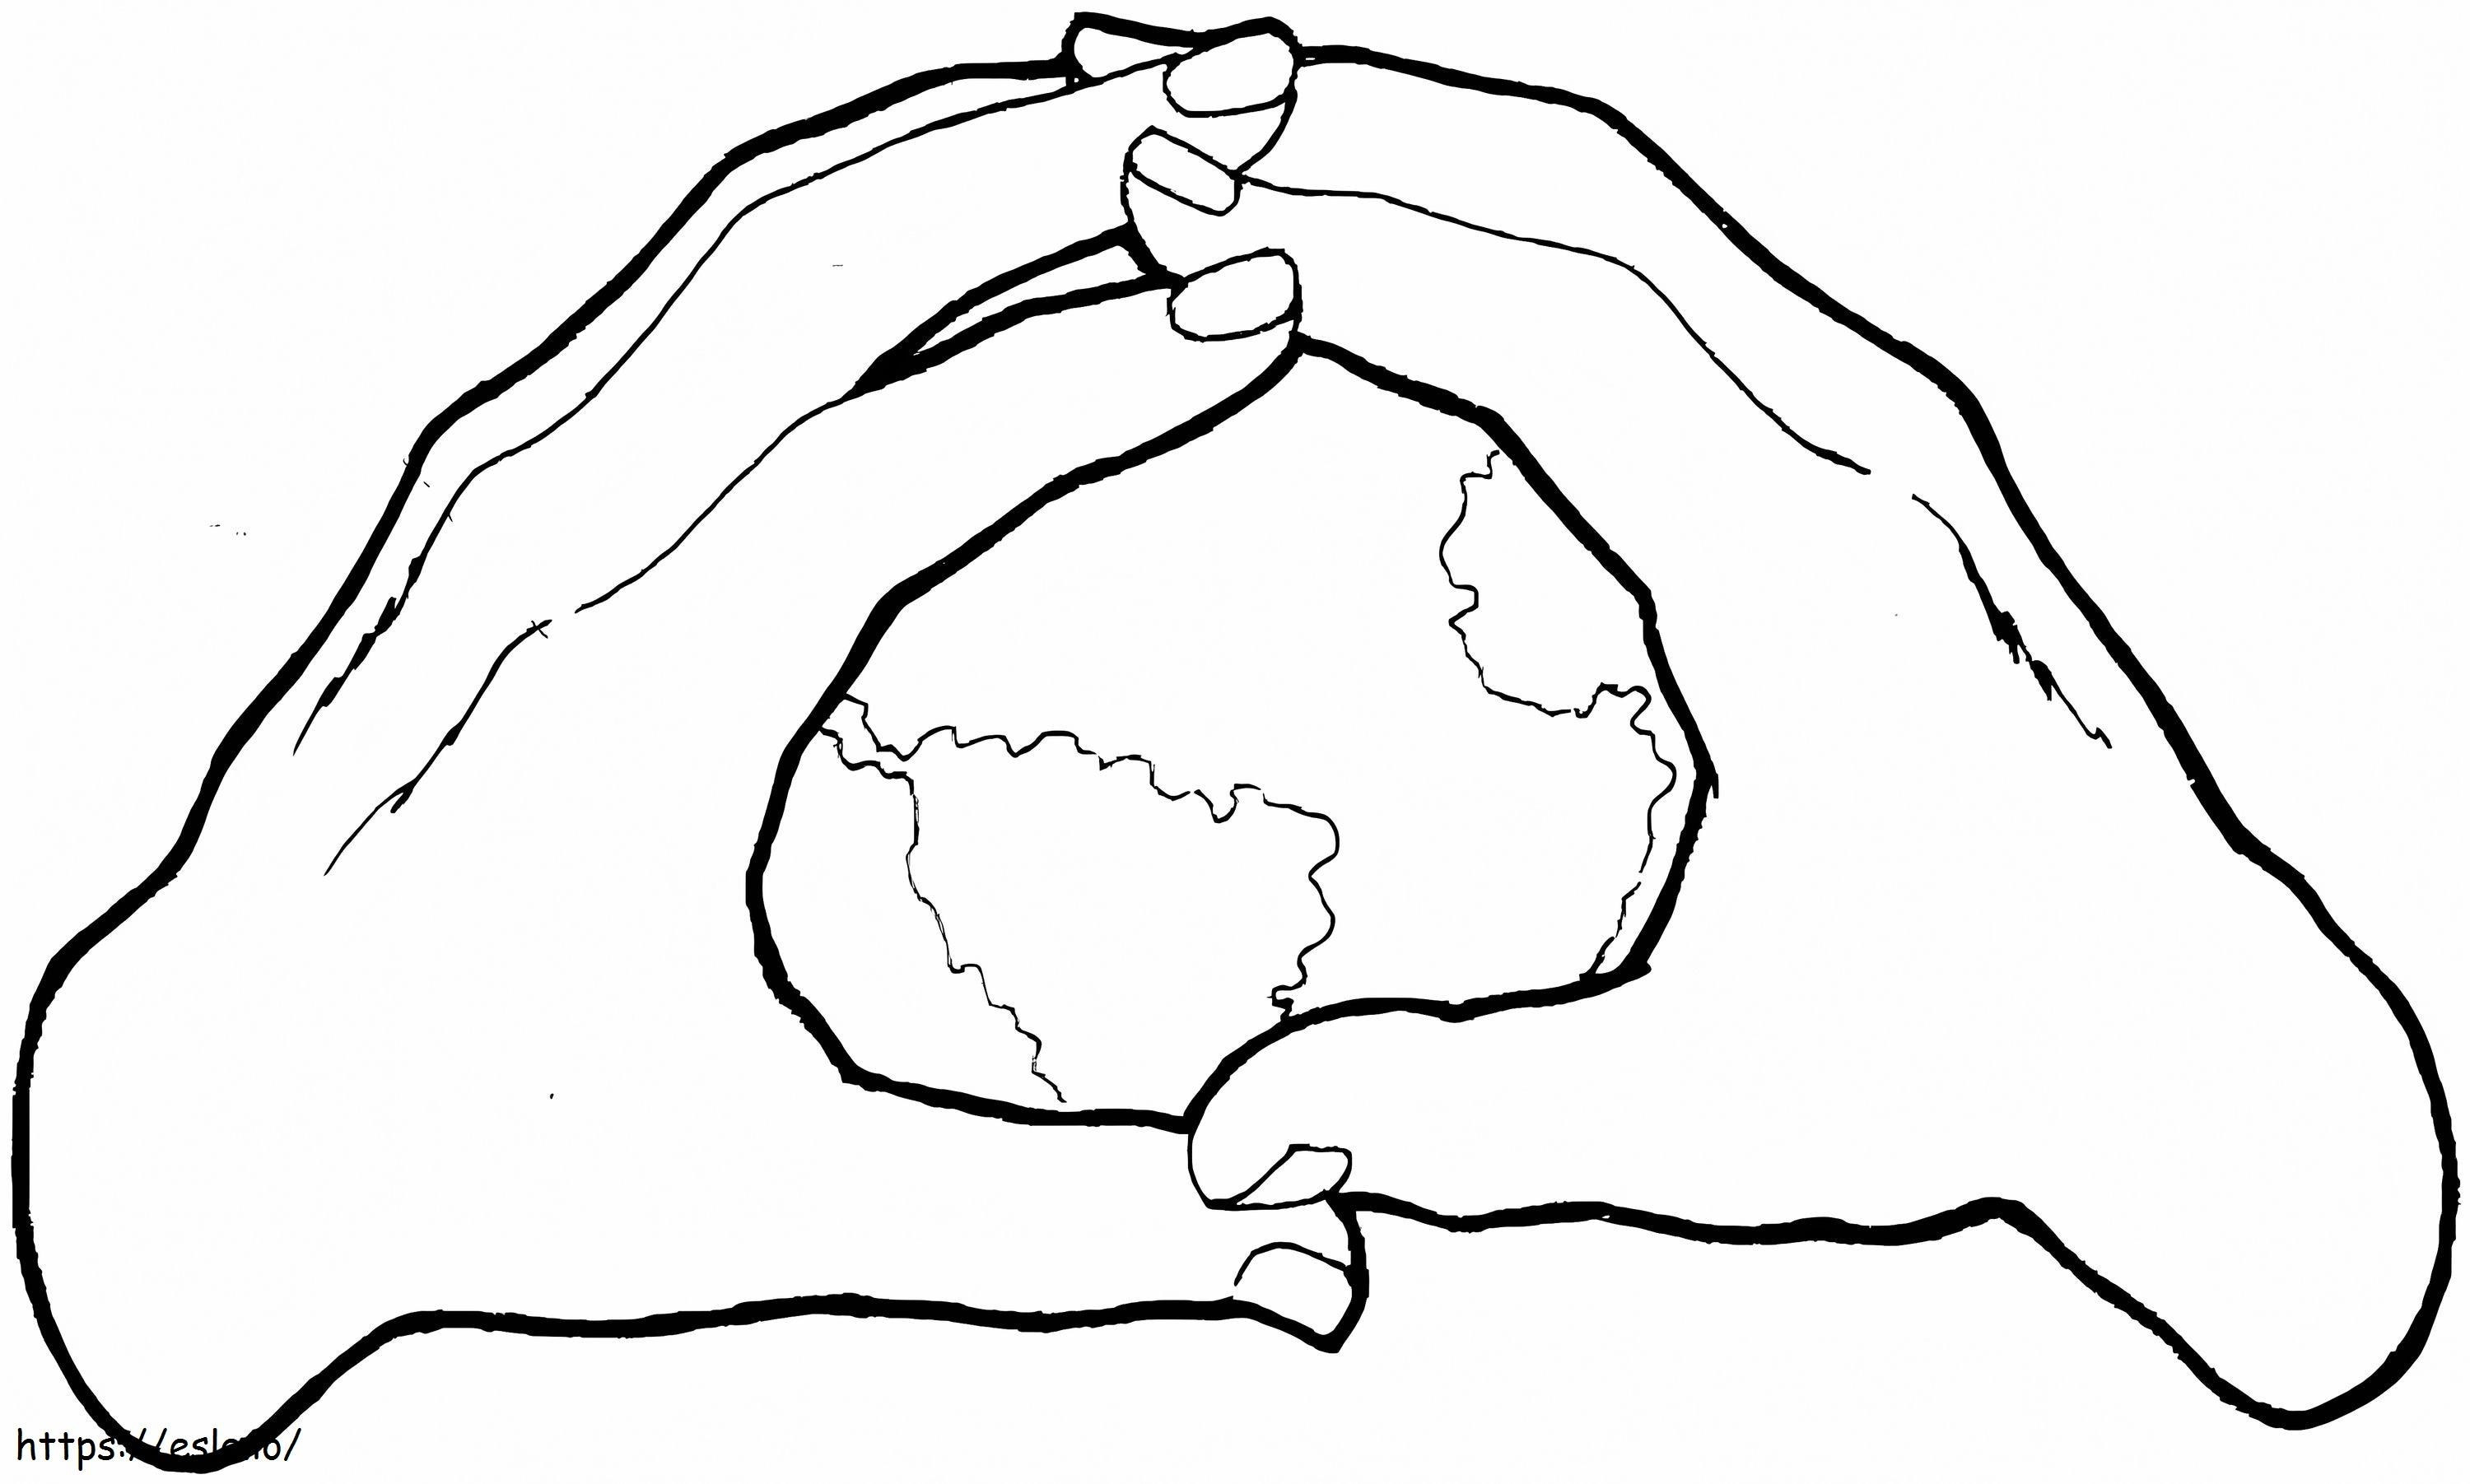 Earth In The Hands coloring page